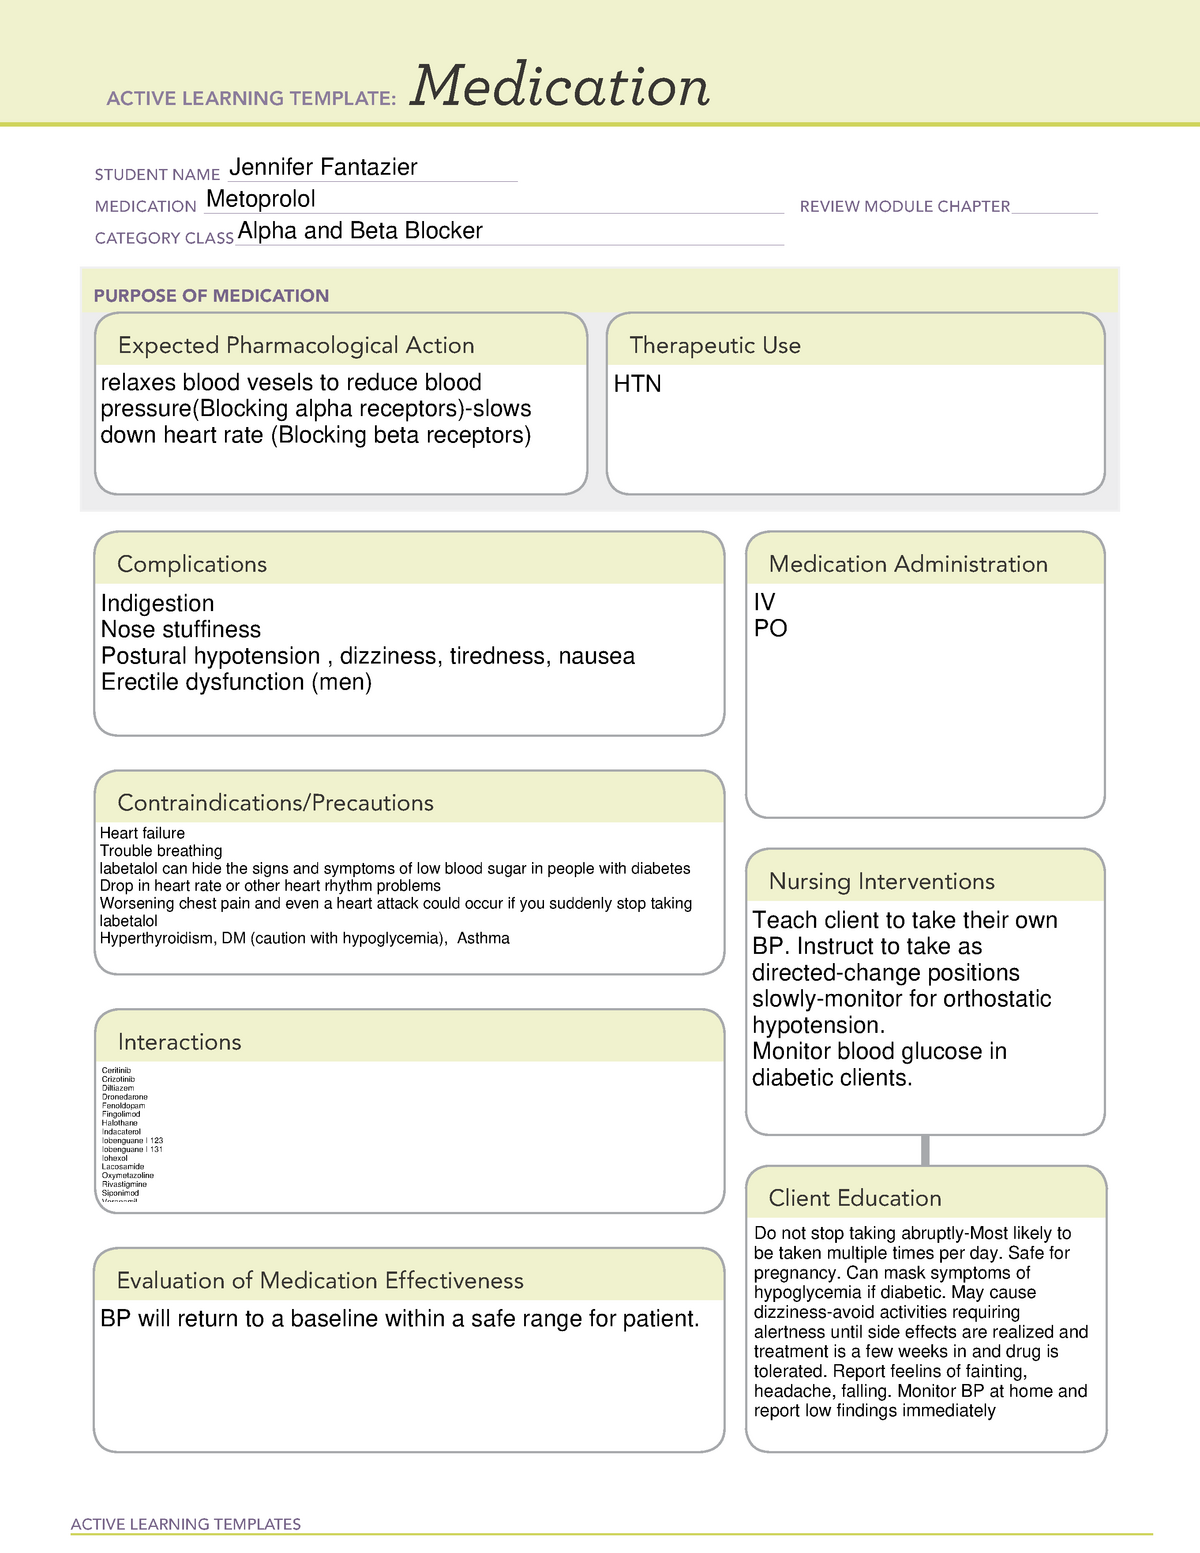 Metoprolol Medication Template ACTIVE LEARNING TEMPLATES Medication